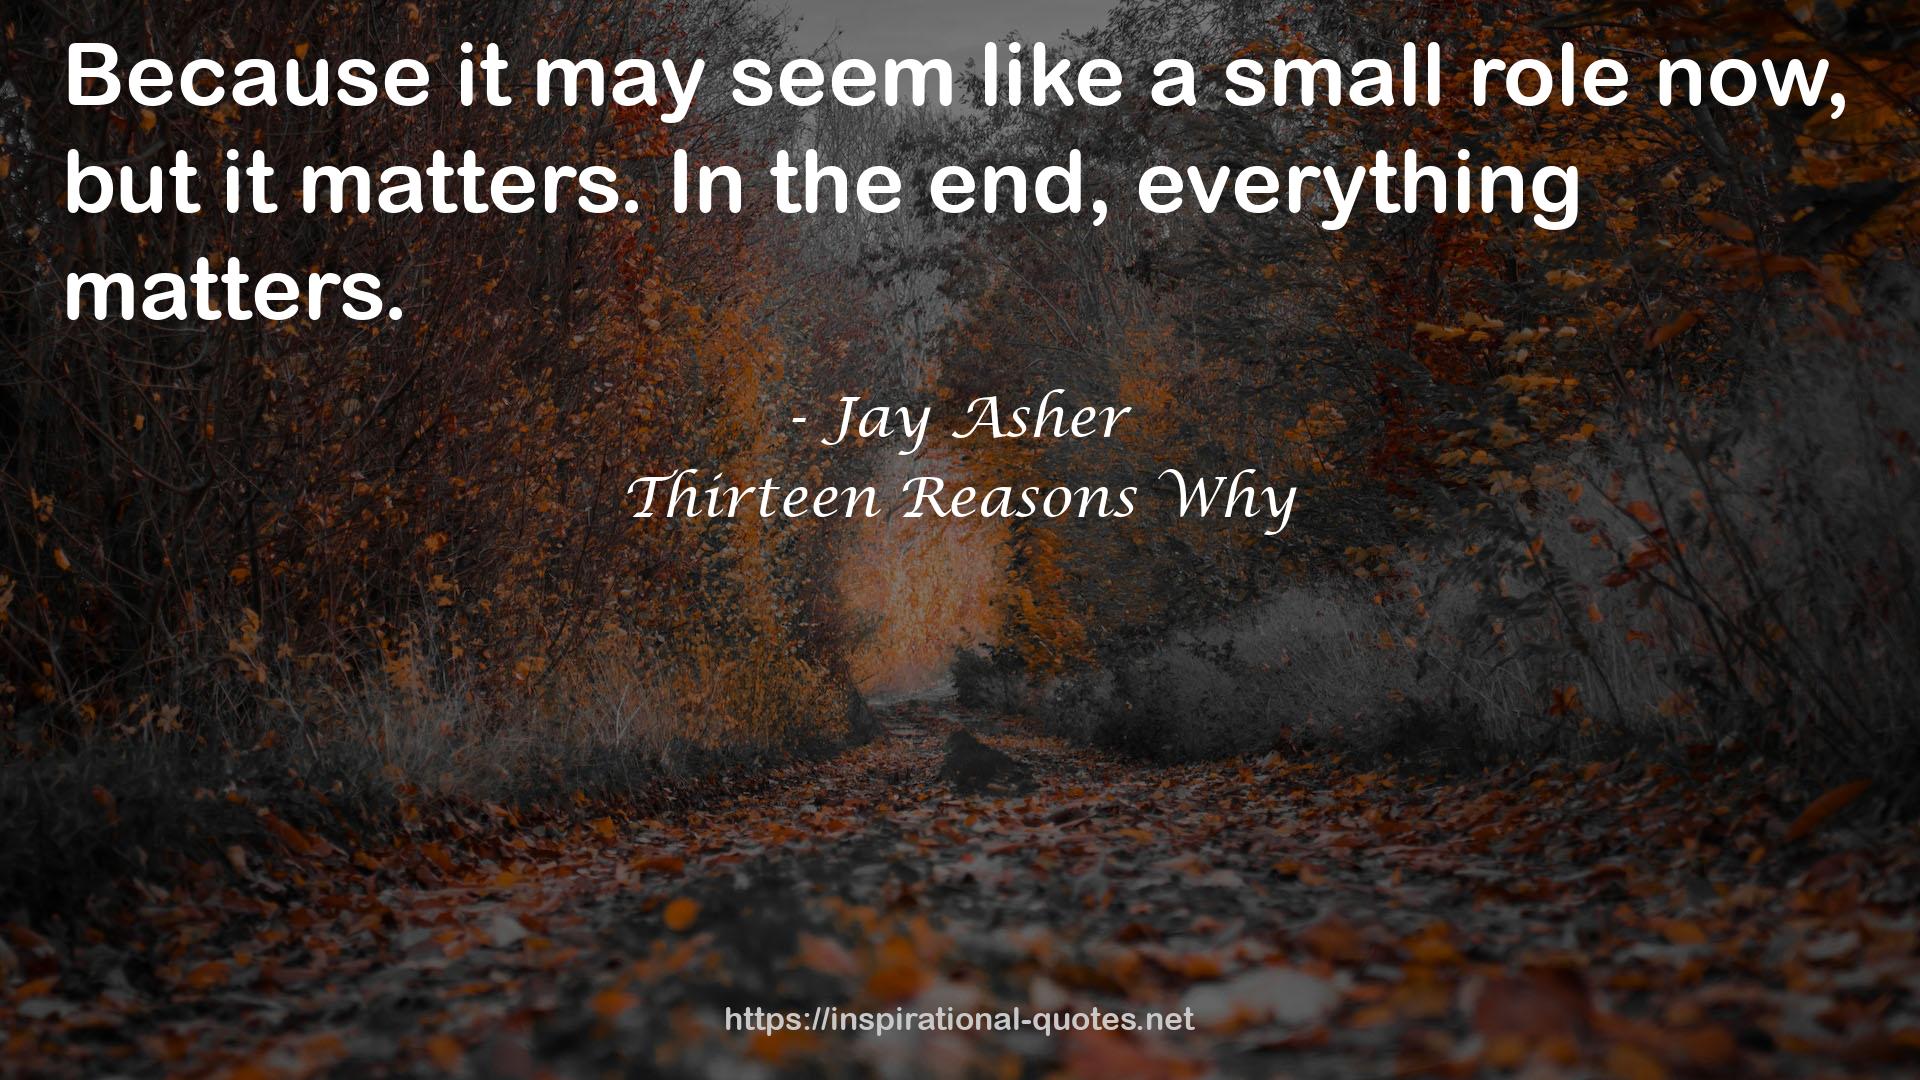 Jay Asher QUOTES